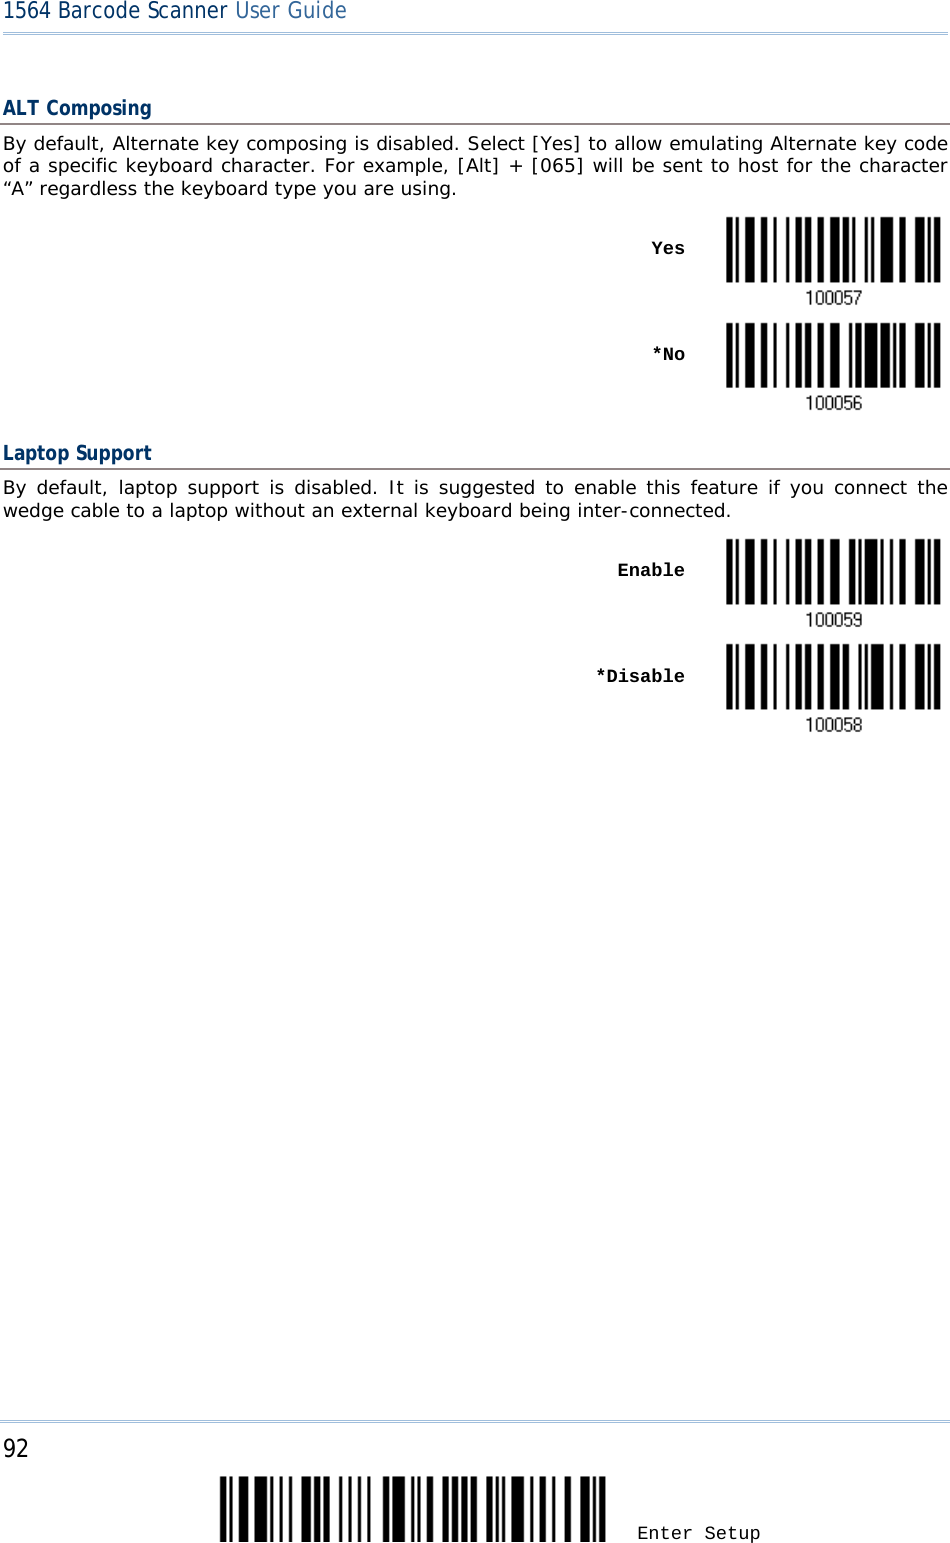 92 Enter Setup 1564 Barcode Scanner User Guide  ALT Composing By default, Alternate key composing is disabled. Select [Yes] to allow emulating Alternate key code of a specific keyboard character. For example, [Alt] + [065] will be sent to host for the character “A” regardless the keyboard type you are using.    Yes     *No  Laptop Support By default, laptop support is disabled. It is suggested to enable this feature if you connect the wedge cable to a laptop without an external keyboard being inter-connected.      Enable     *Disable              